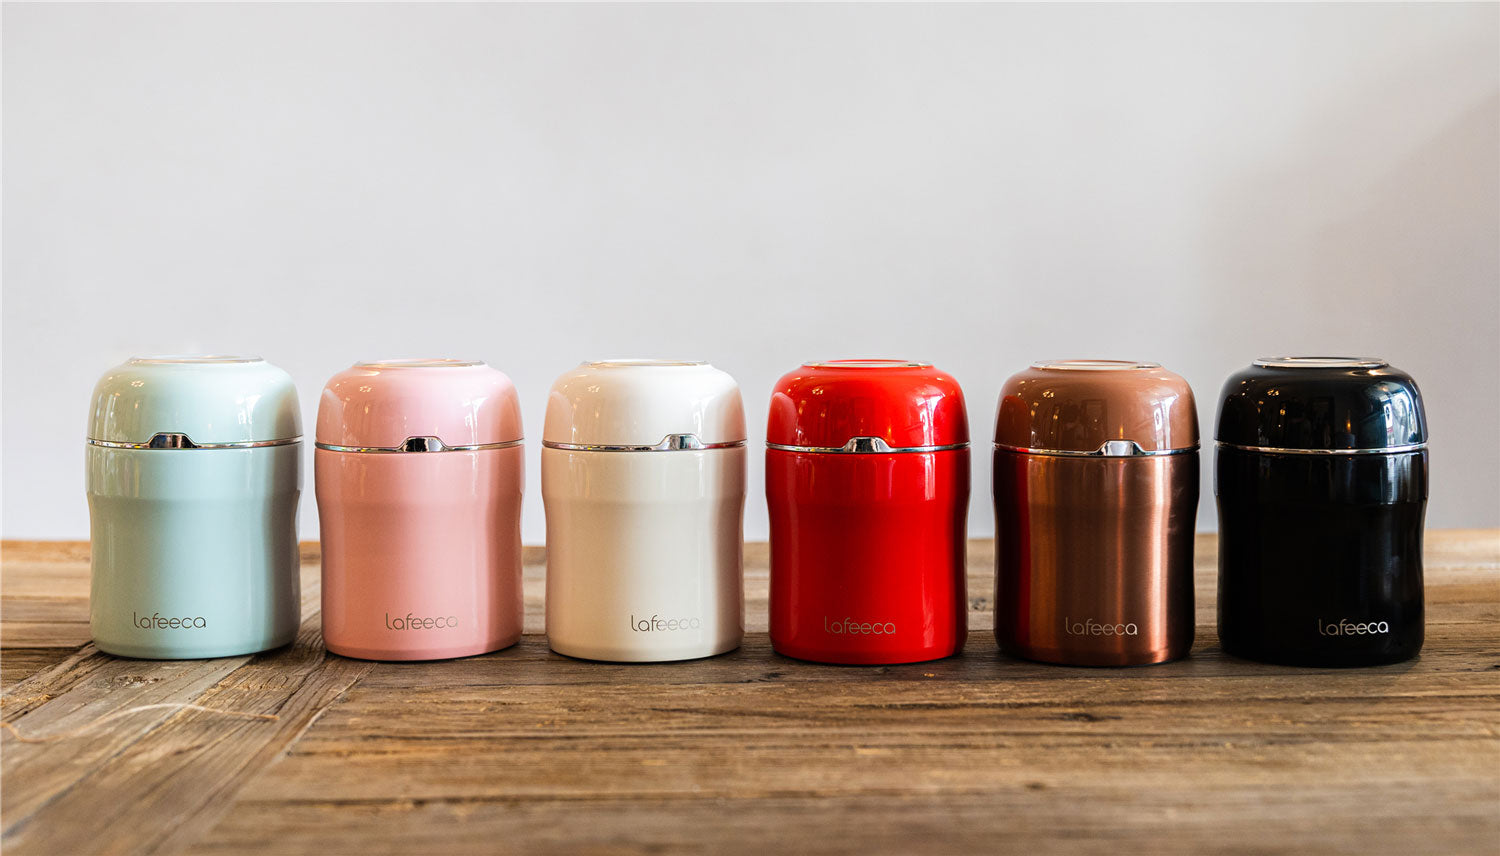 pressure thermos household thermos stainless steel thermos bottles